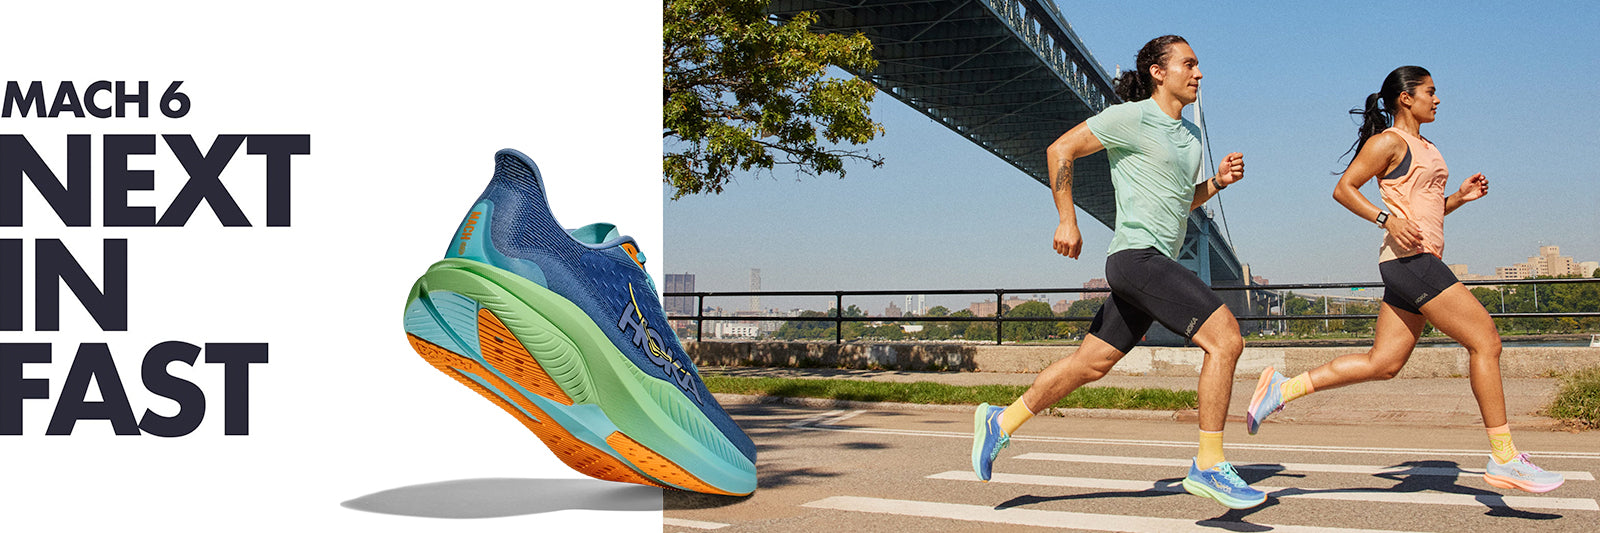 Vibrant image featuring a large, multi-colored HOKA Mach 6 running shoe with 'Mach 6 Next in Fast' text. A man and a woman, both wearing the HOKA Mach 6 running shoes, sprint down a dynamic urban street scene, exuding speed and energy